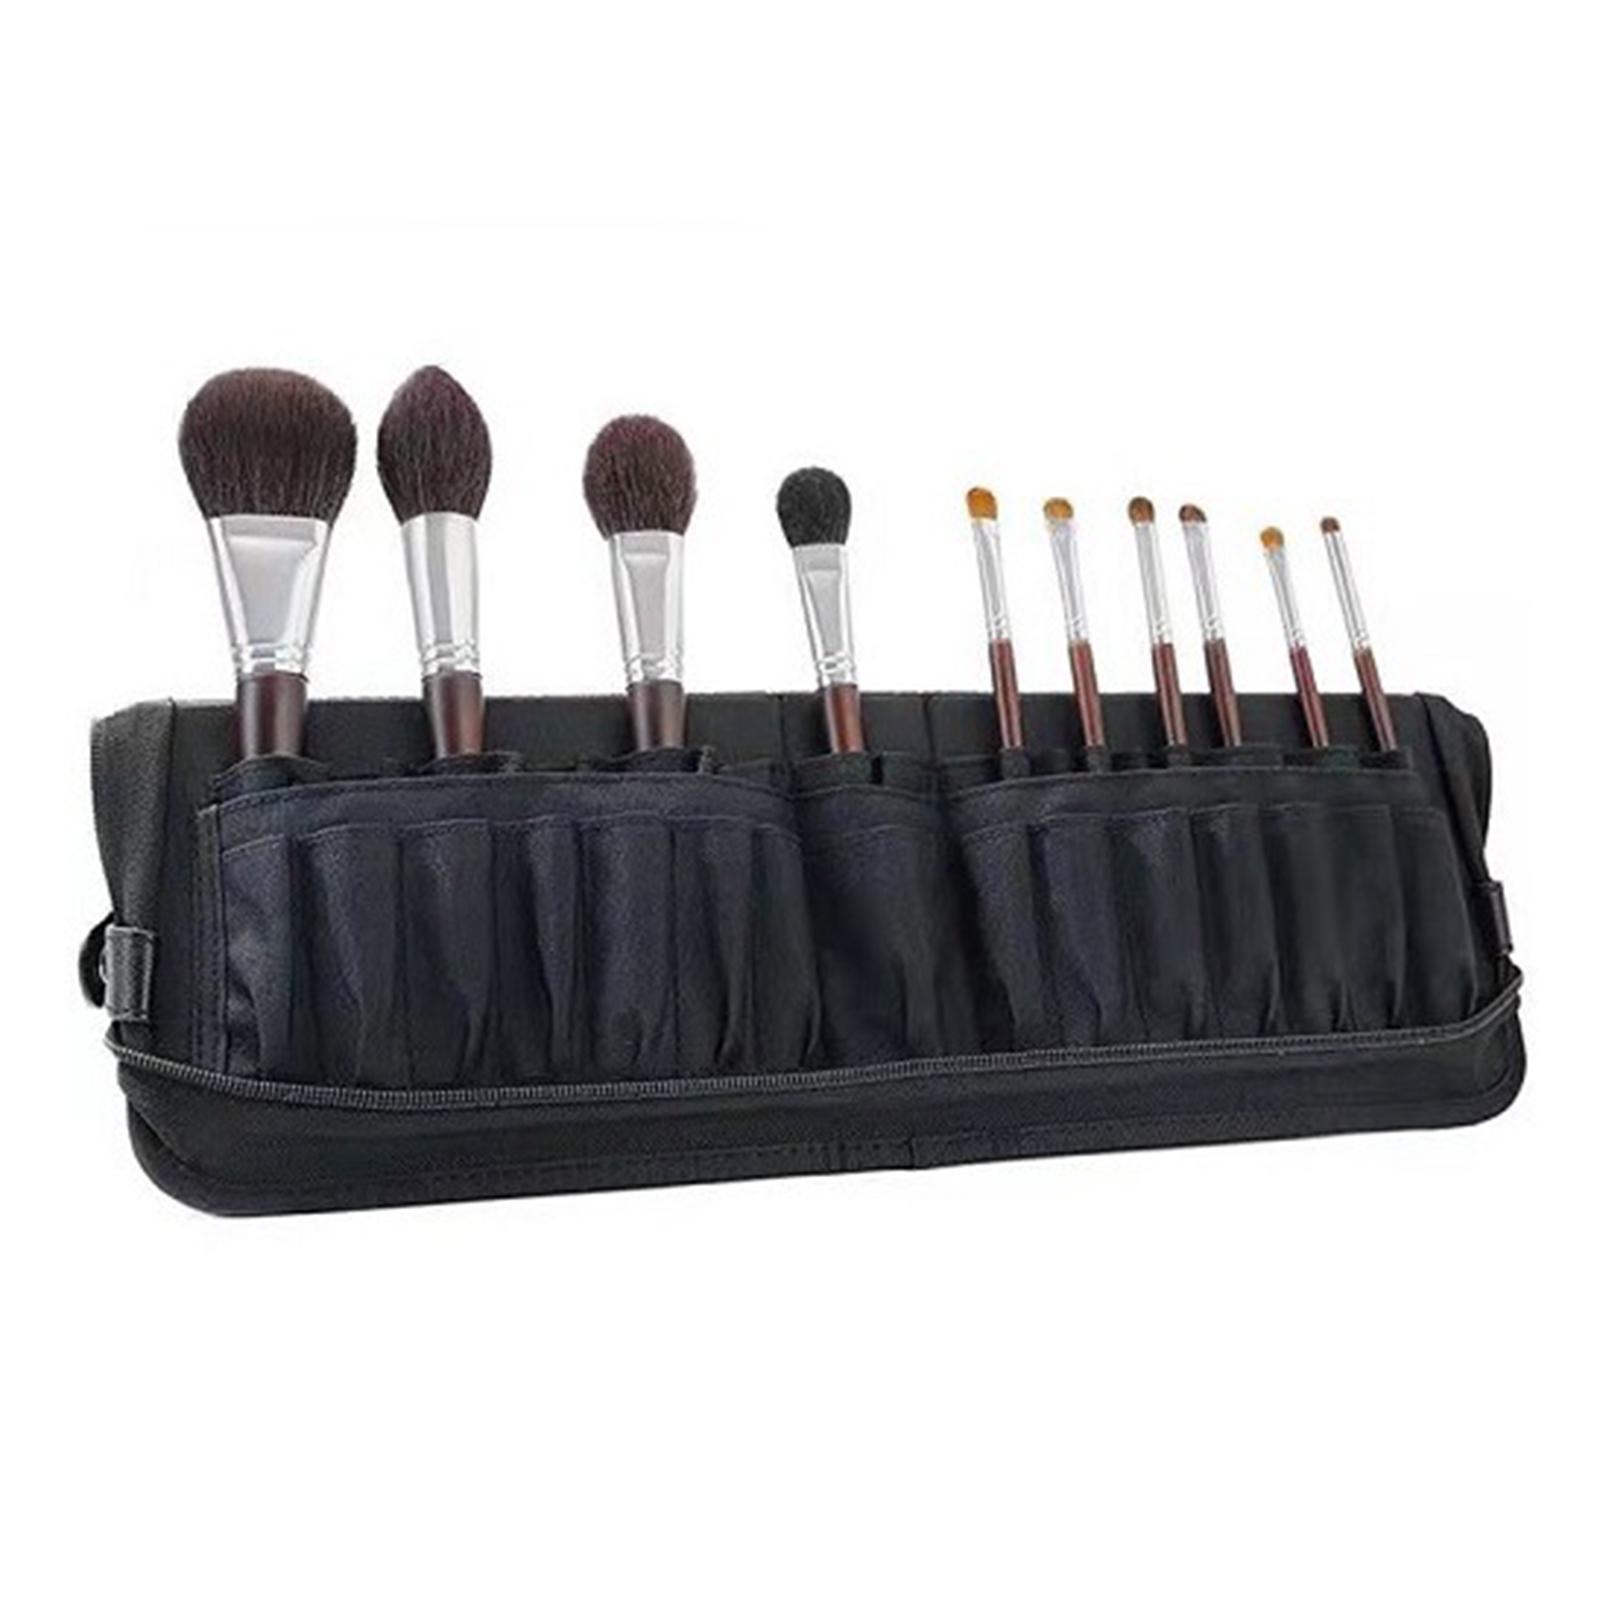 Makeup Brushes Organizer Bag Cosmetic Bag Pouch Carrying Bag for Home Use